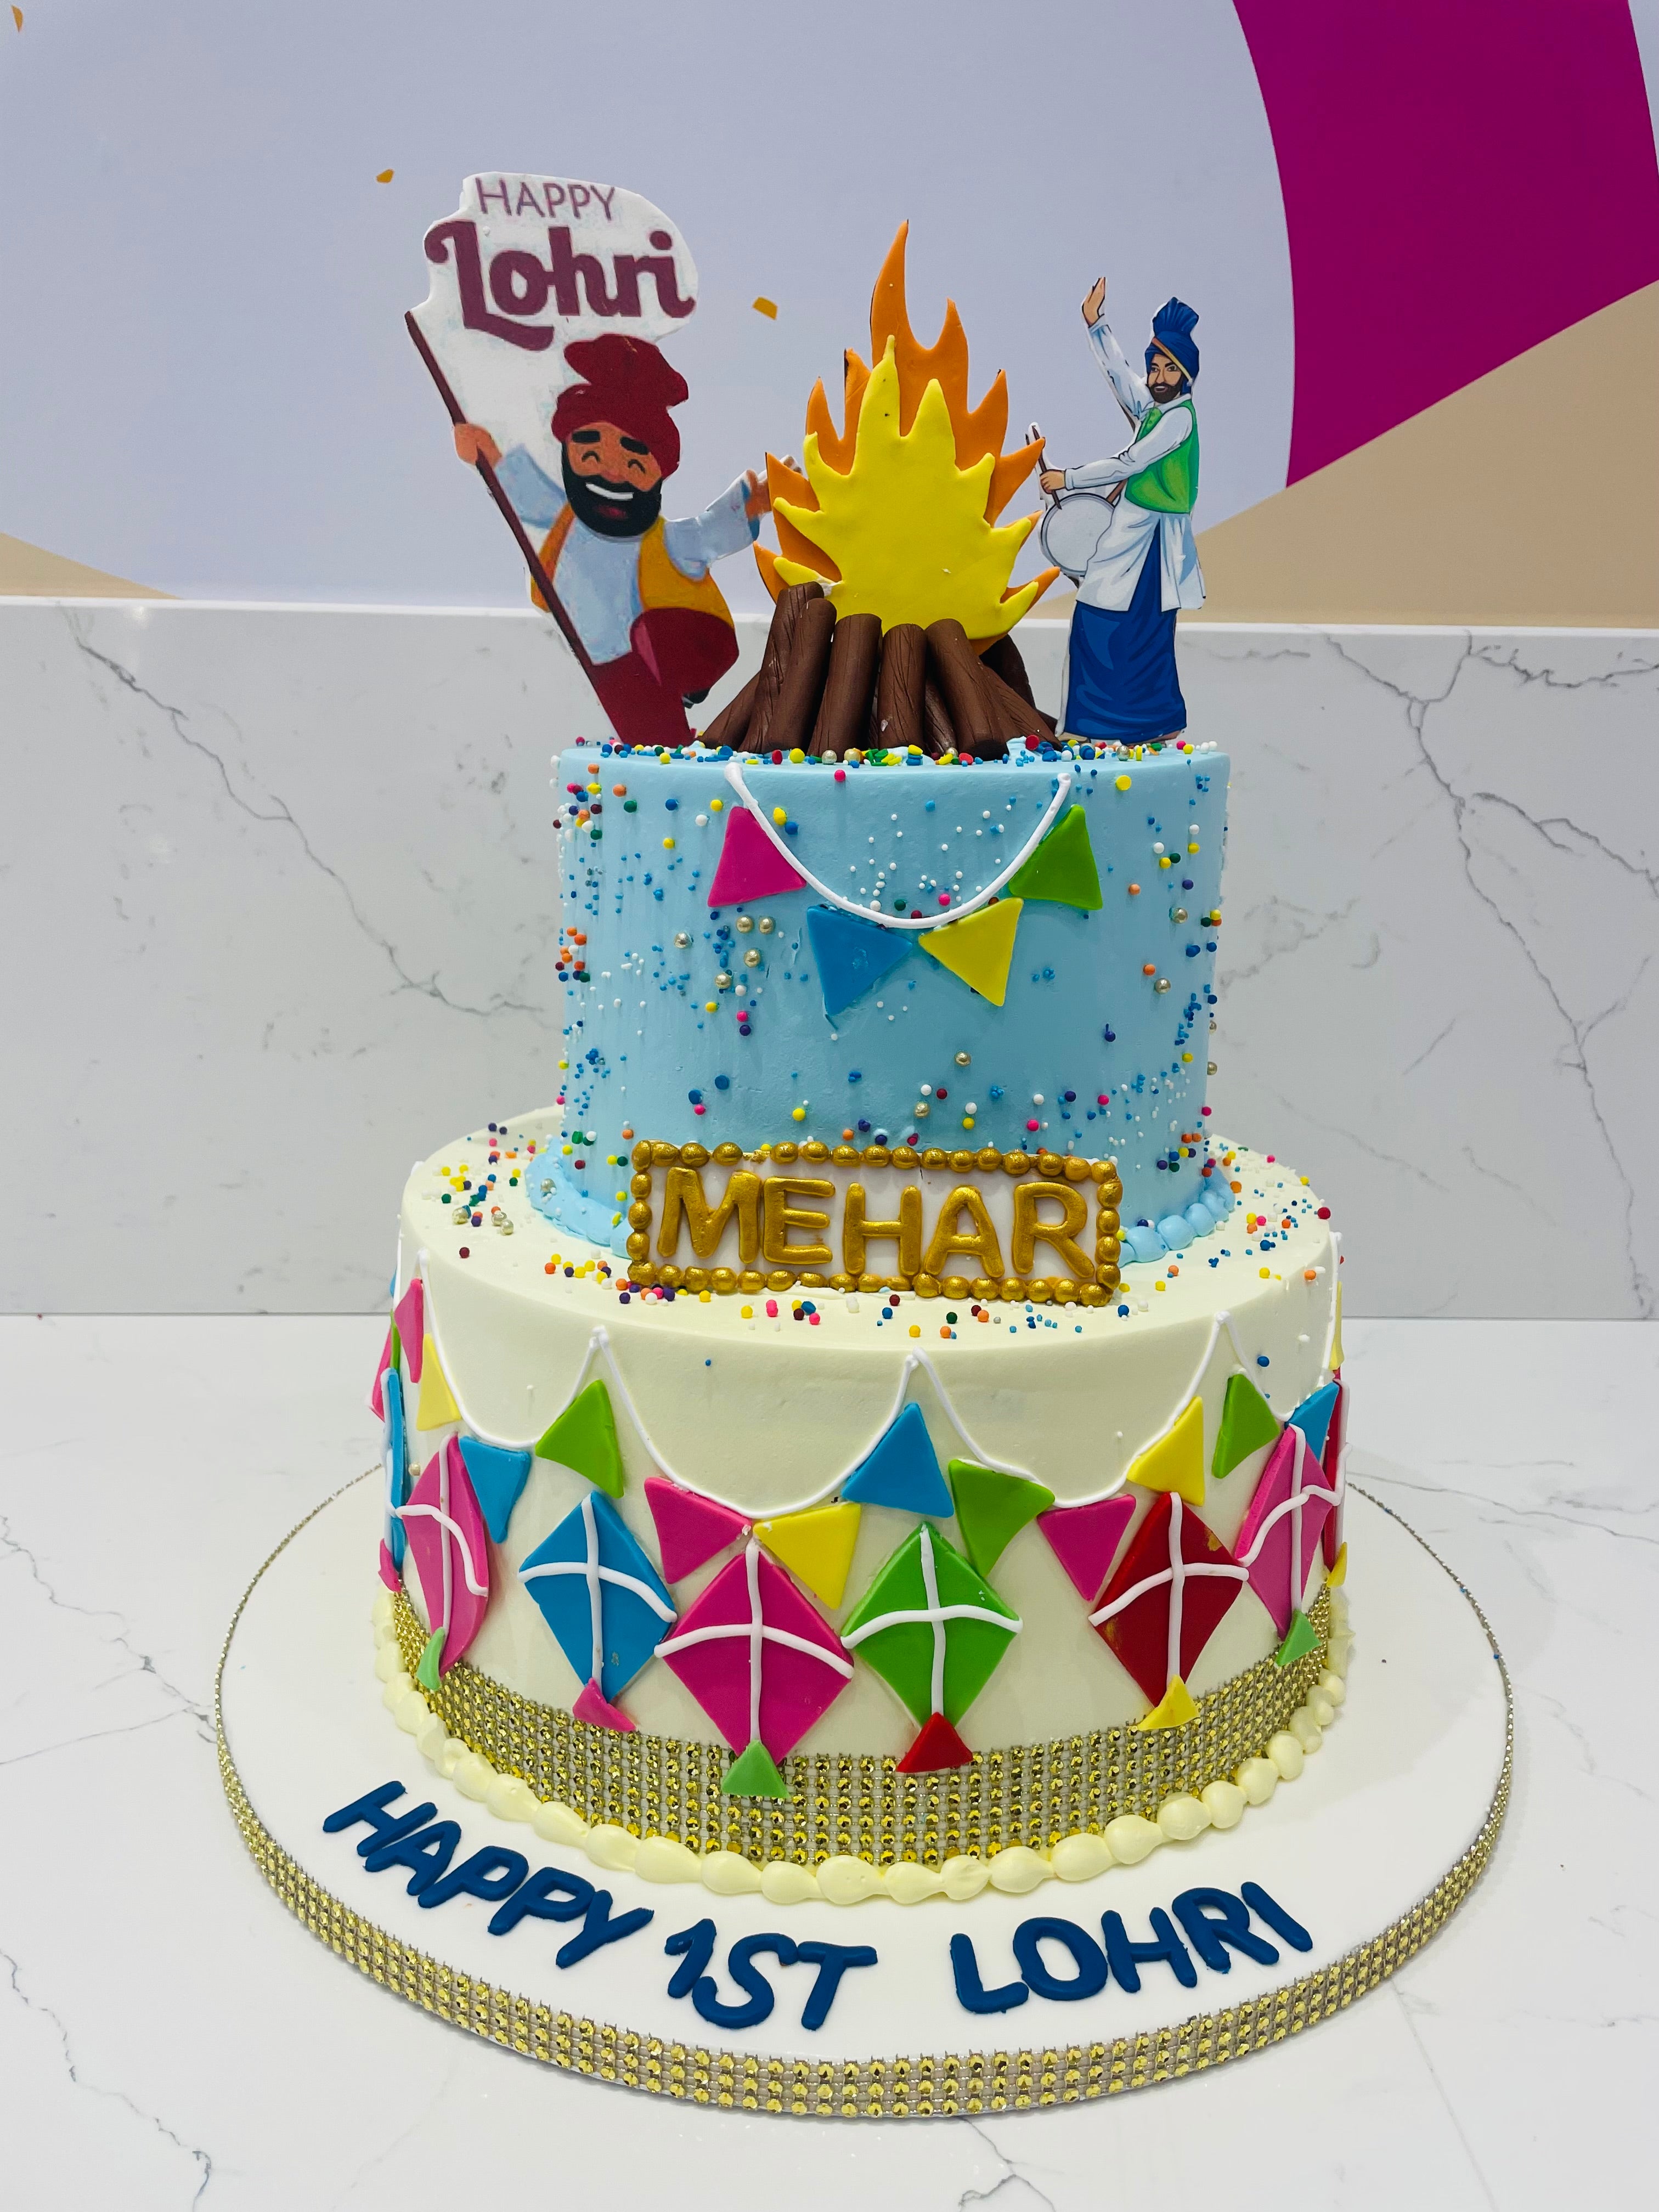 Trendy Cake For Lohri Celebrations for wife delivered in Barrackpore